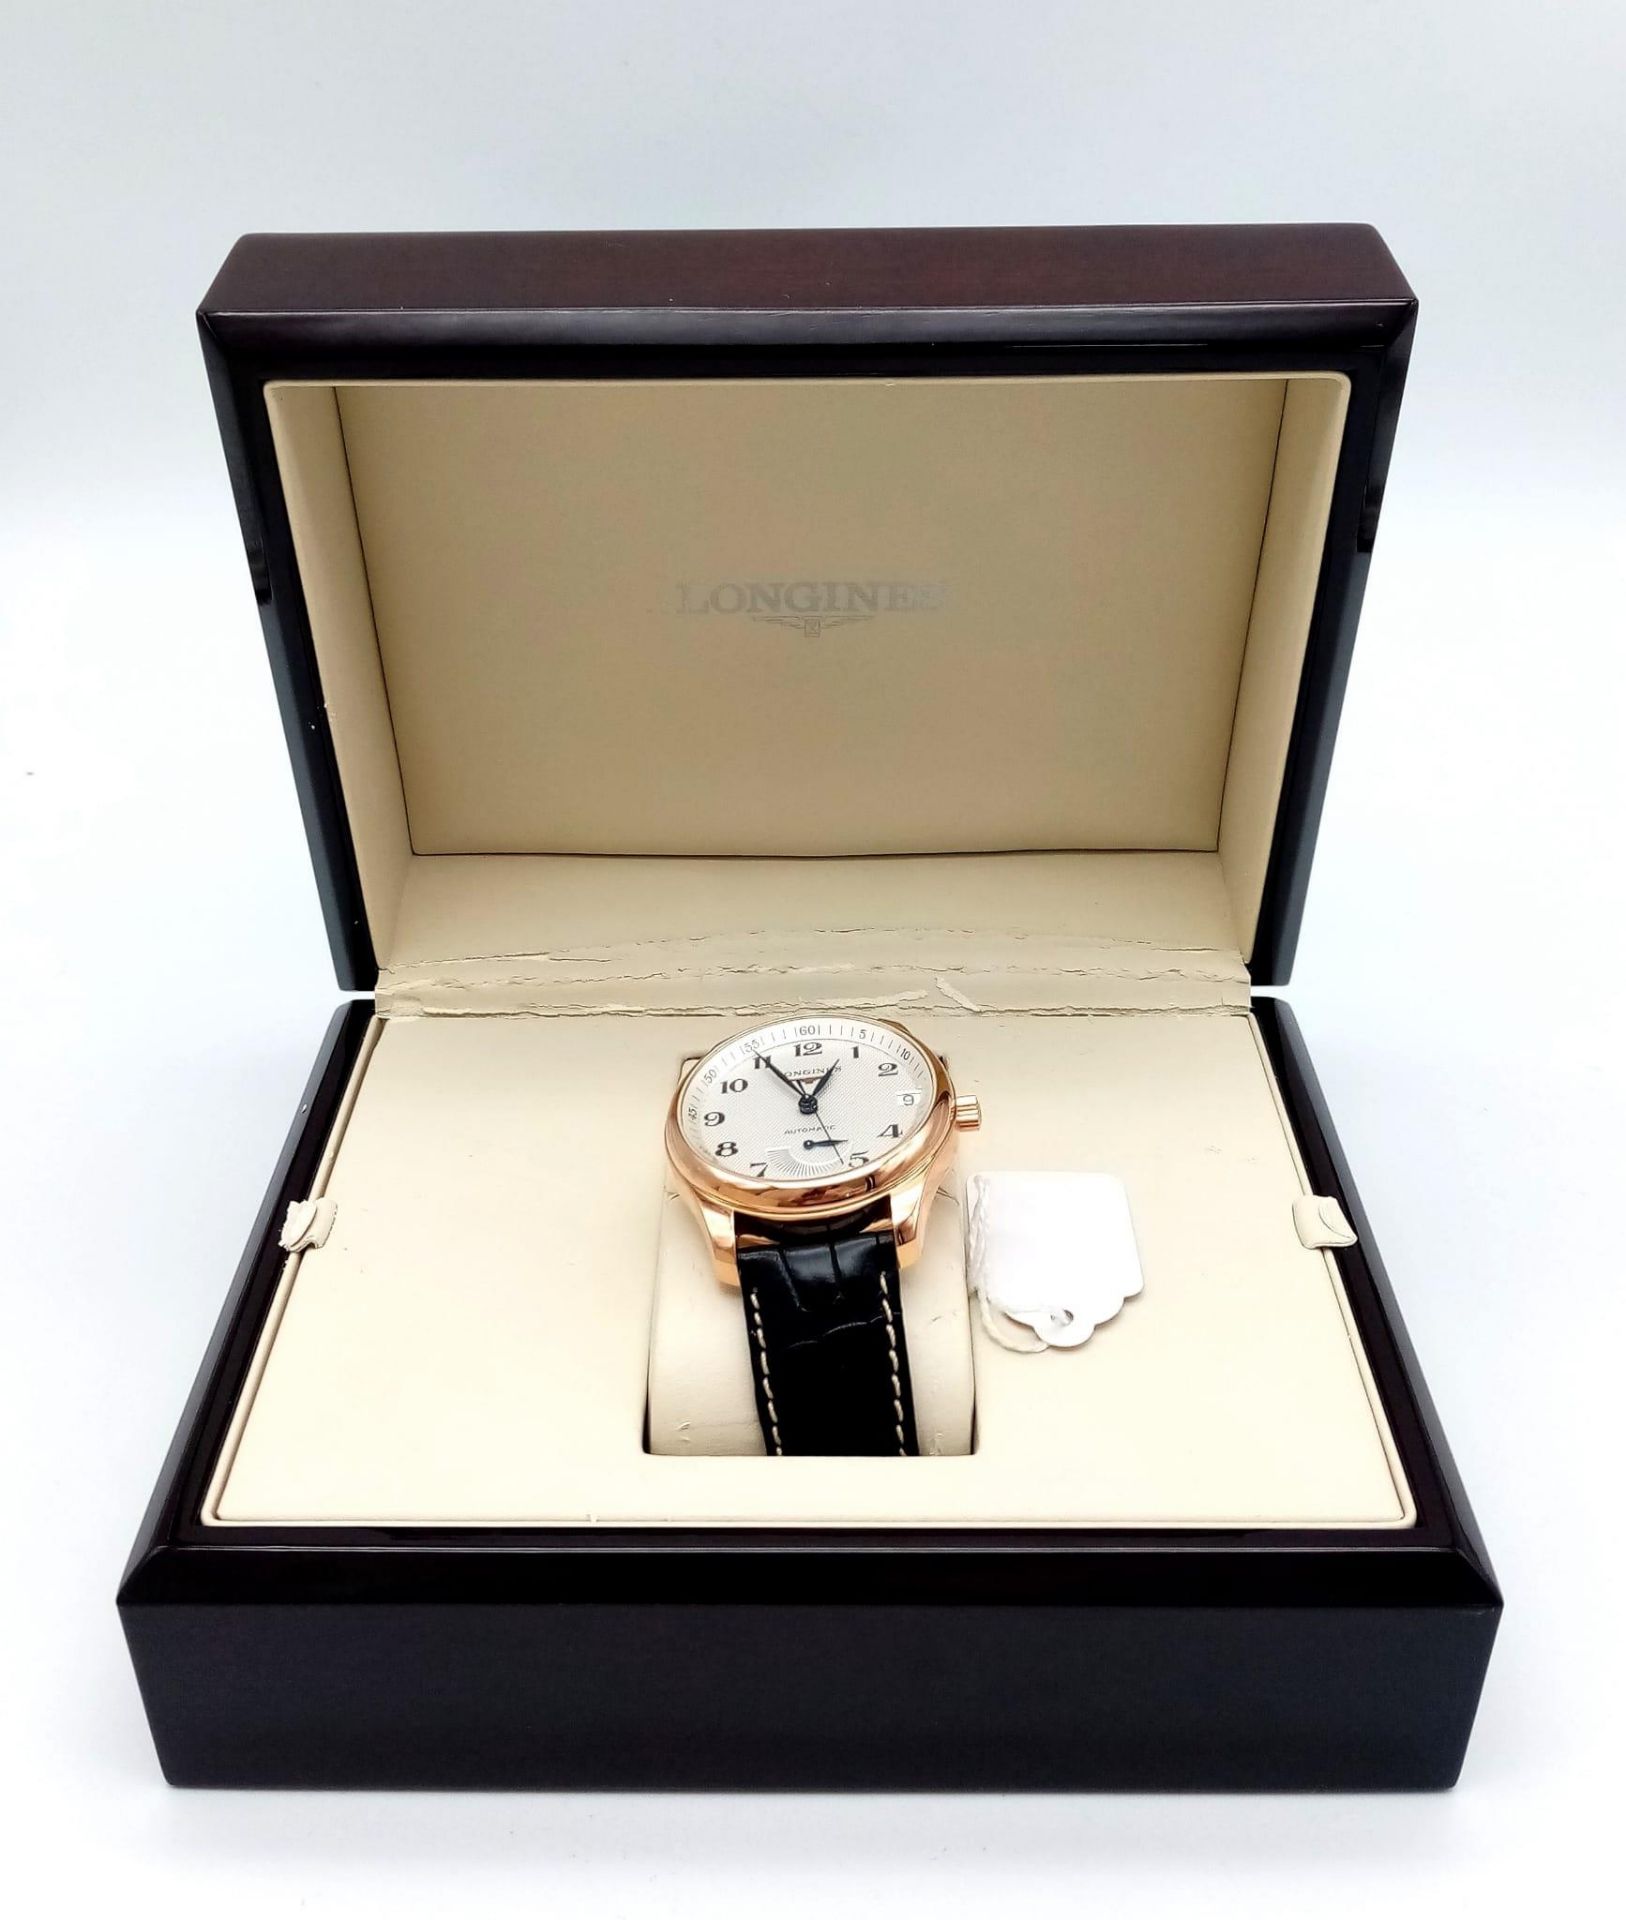 A Glorious Longine 18K Rose Gold Automatic Gents Watch. Black Alligator leather strap. 18K rose gold - Image 7 of 9